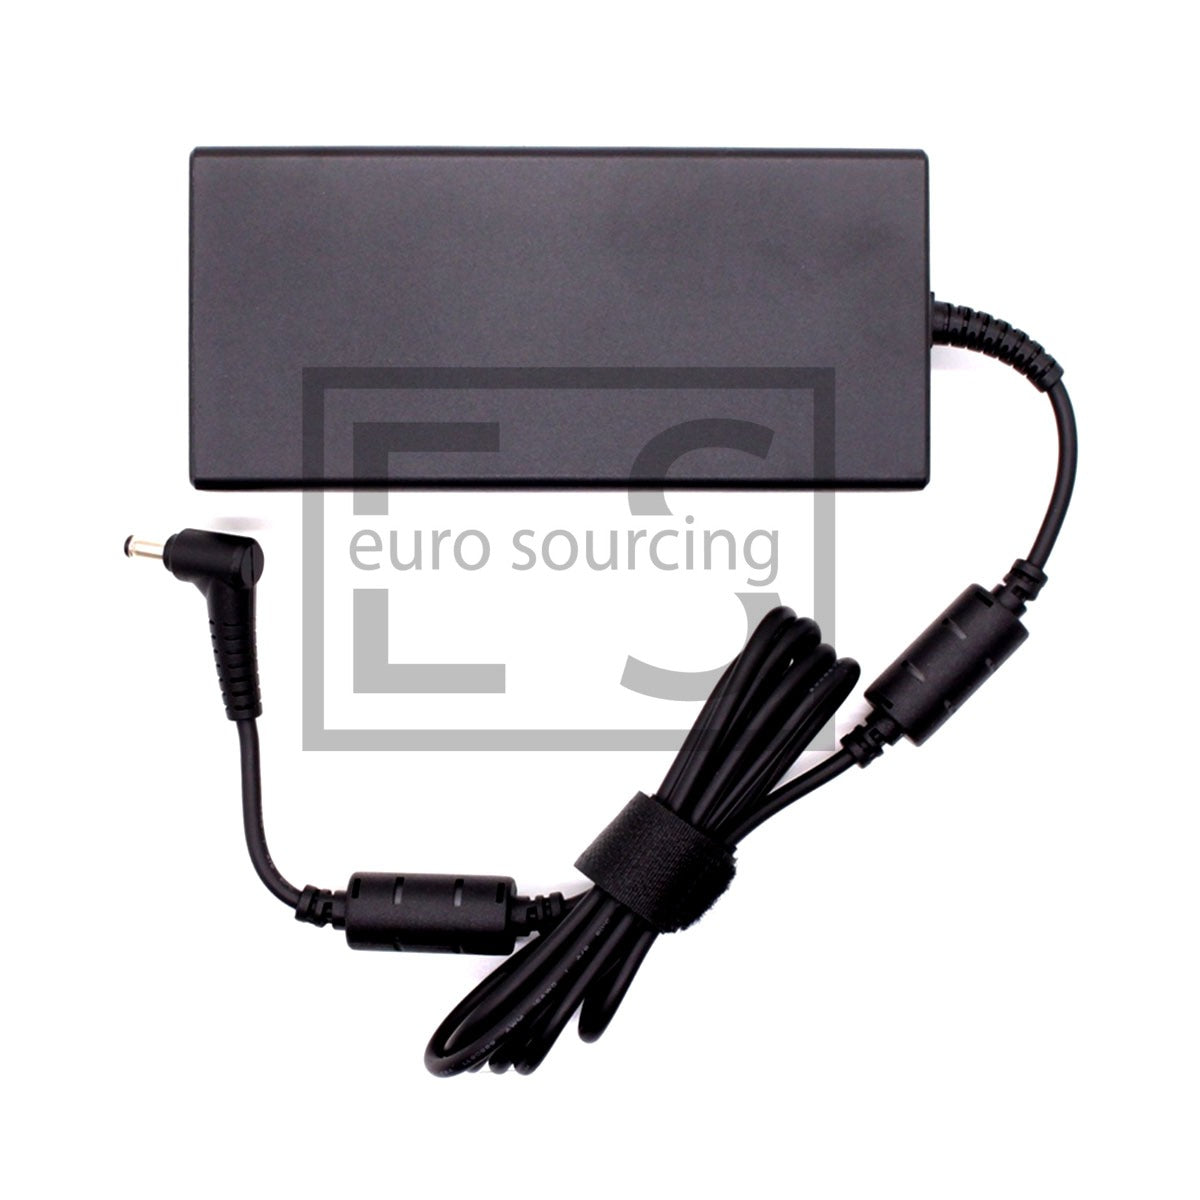 Genuine Delta 180W 19.5V 9.23A 5.5MM x 1.7MM Gaming Laptop Adapter Power Supply Compatible With ACER NITRO 5 AN515-41-11FG